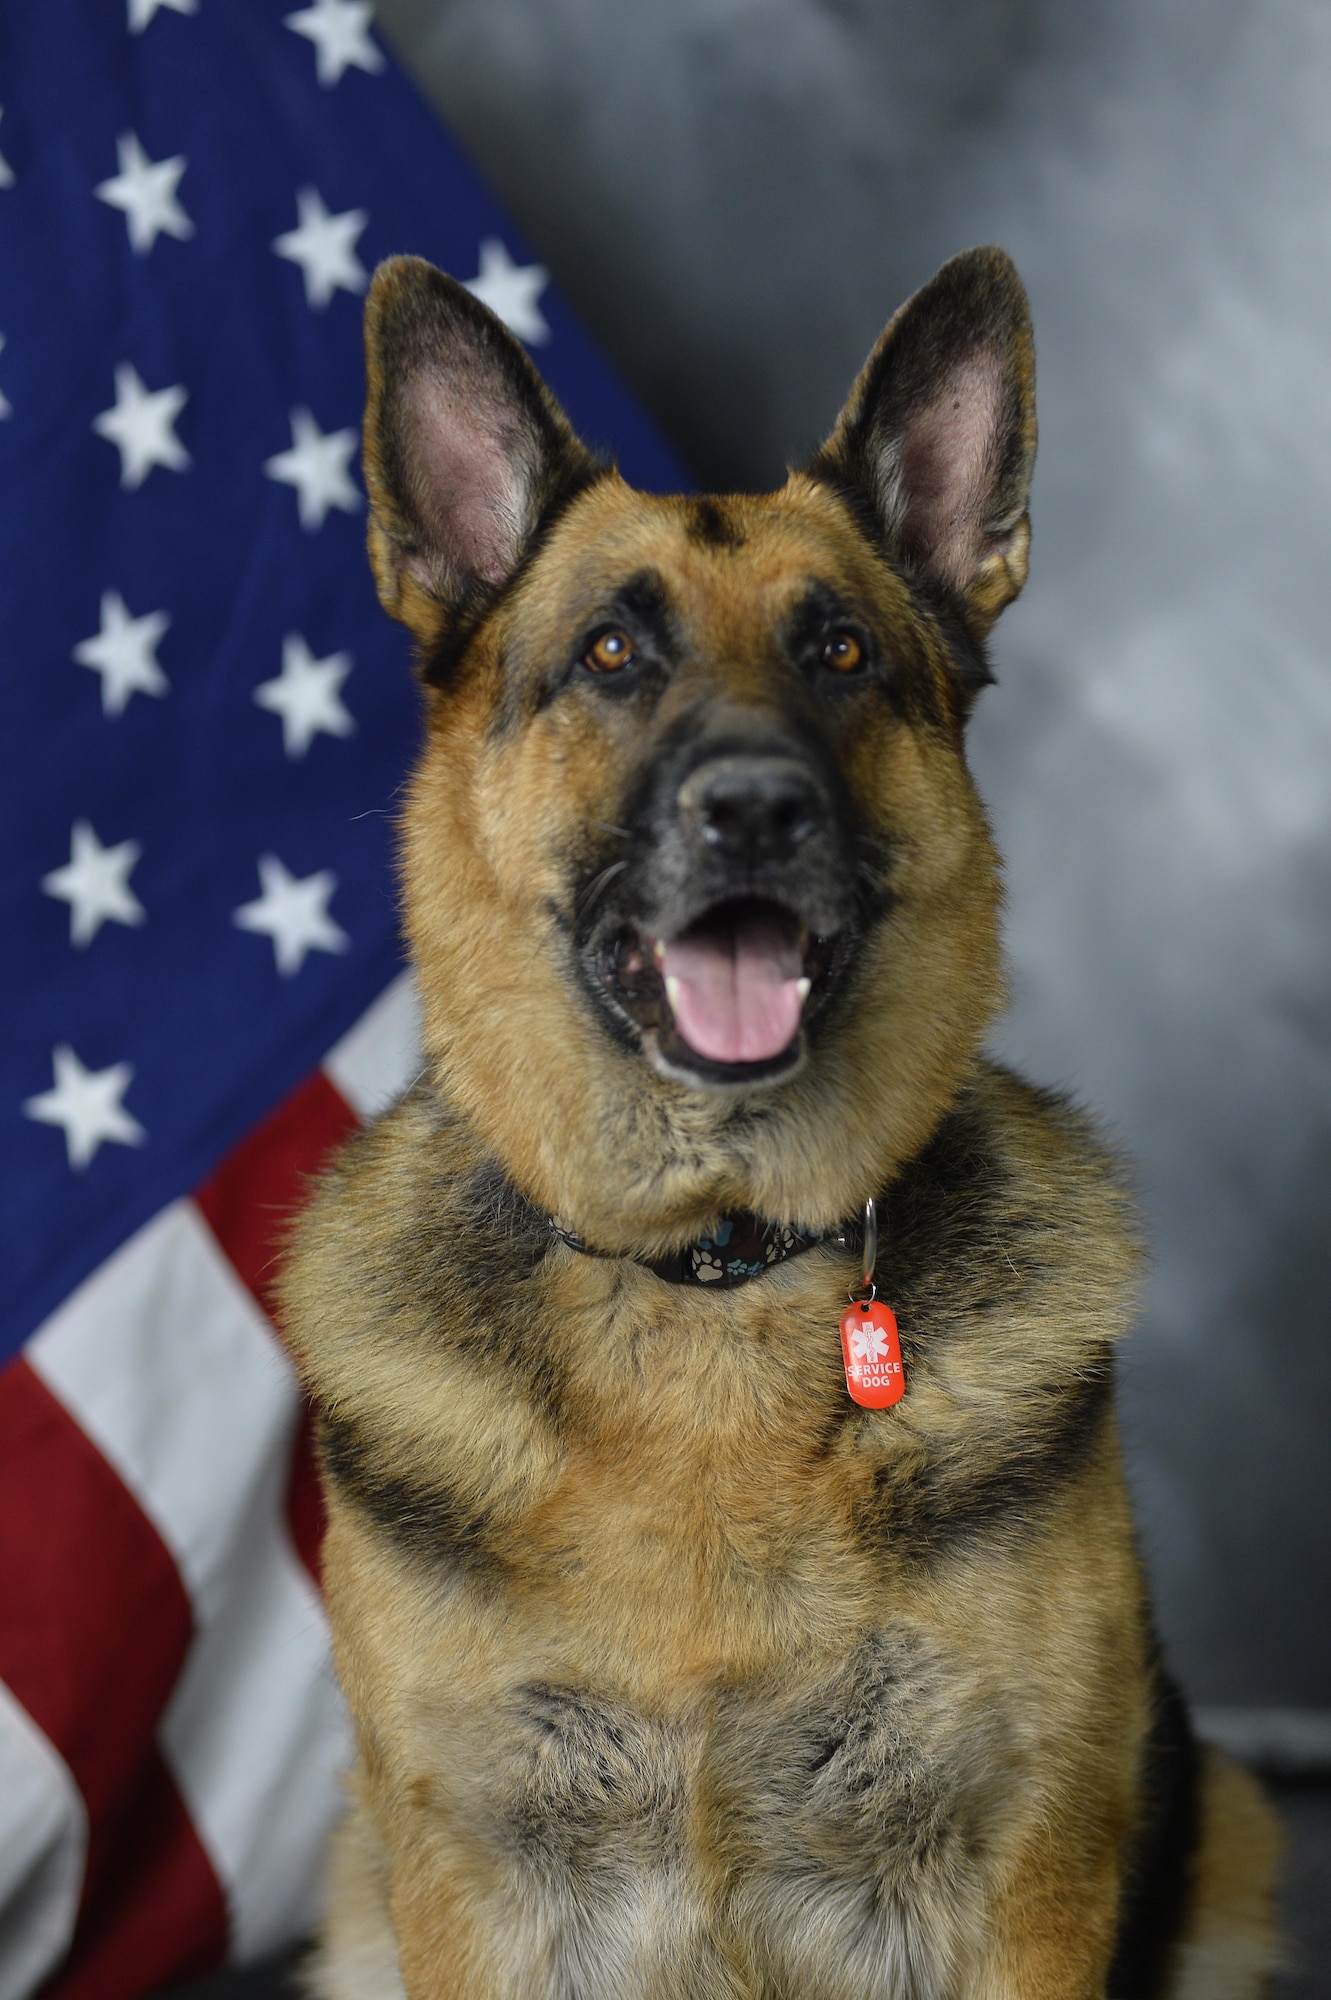 Jax is a German Shepherd who is completing training as a certified therapy dog for the 163rd Attack Wing at March Air Reserve Base. Jax poses for his official photo in the studio at March Air Reserve Base, California, Dec. 12, 2015. (U.S. Air National Guard photo by Master Sgt. Julie Avey)